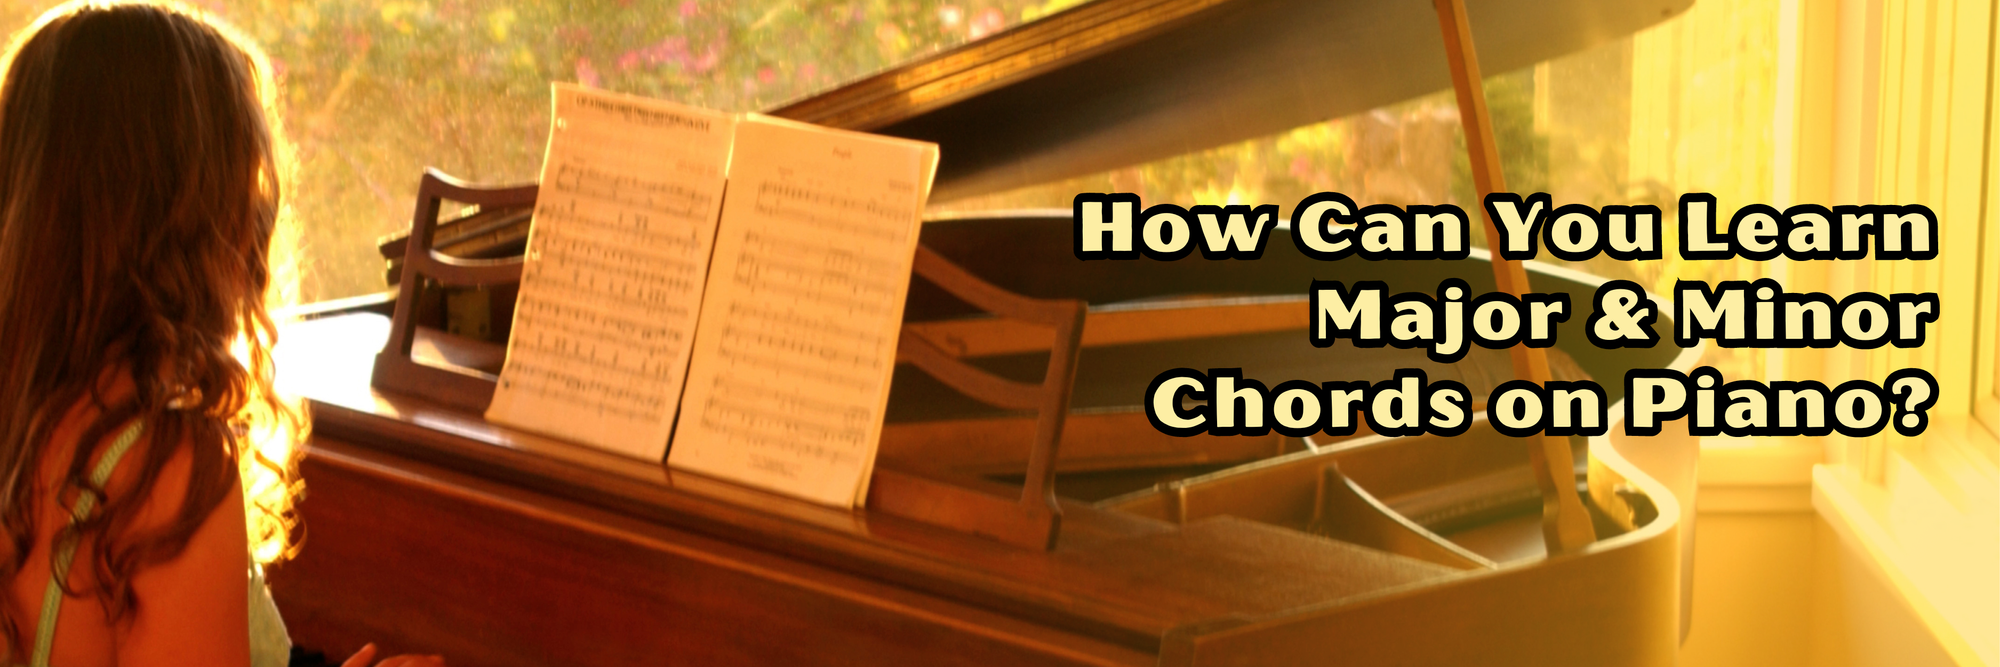 How can you learn Major & Minor Chords on Piano?